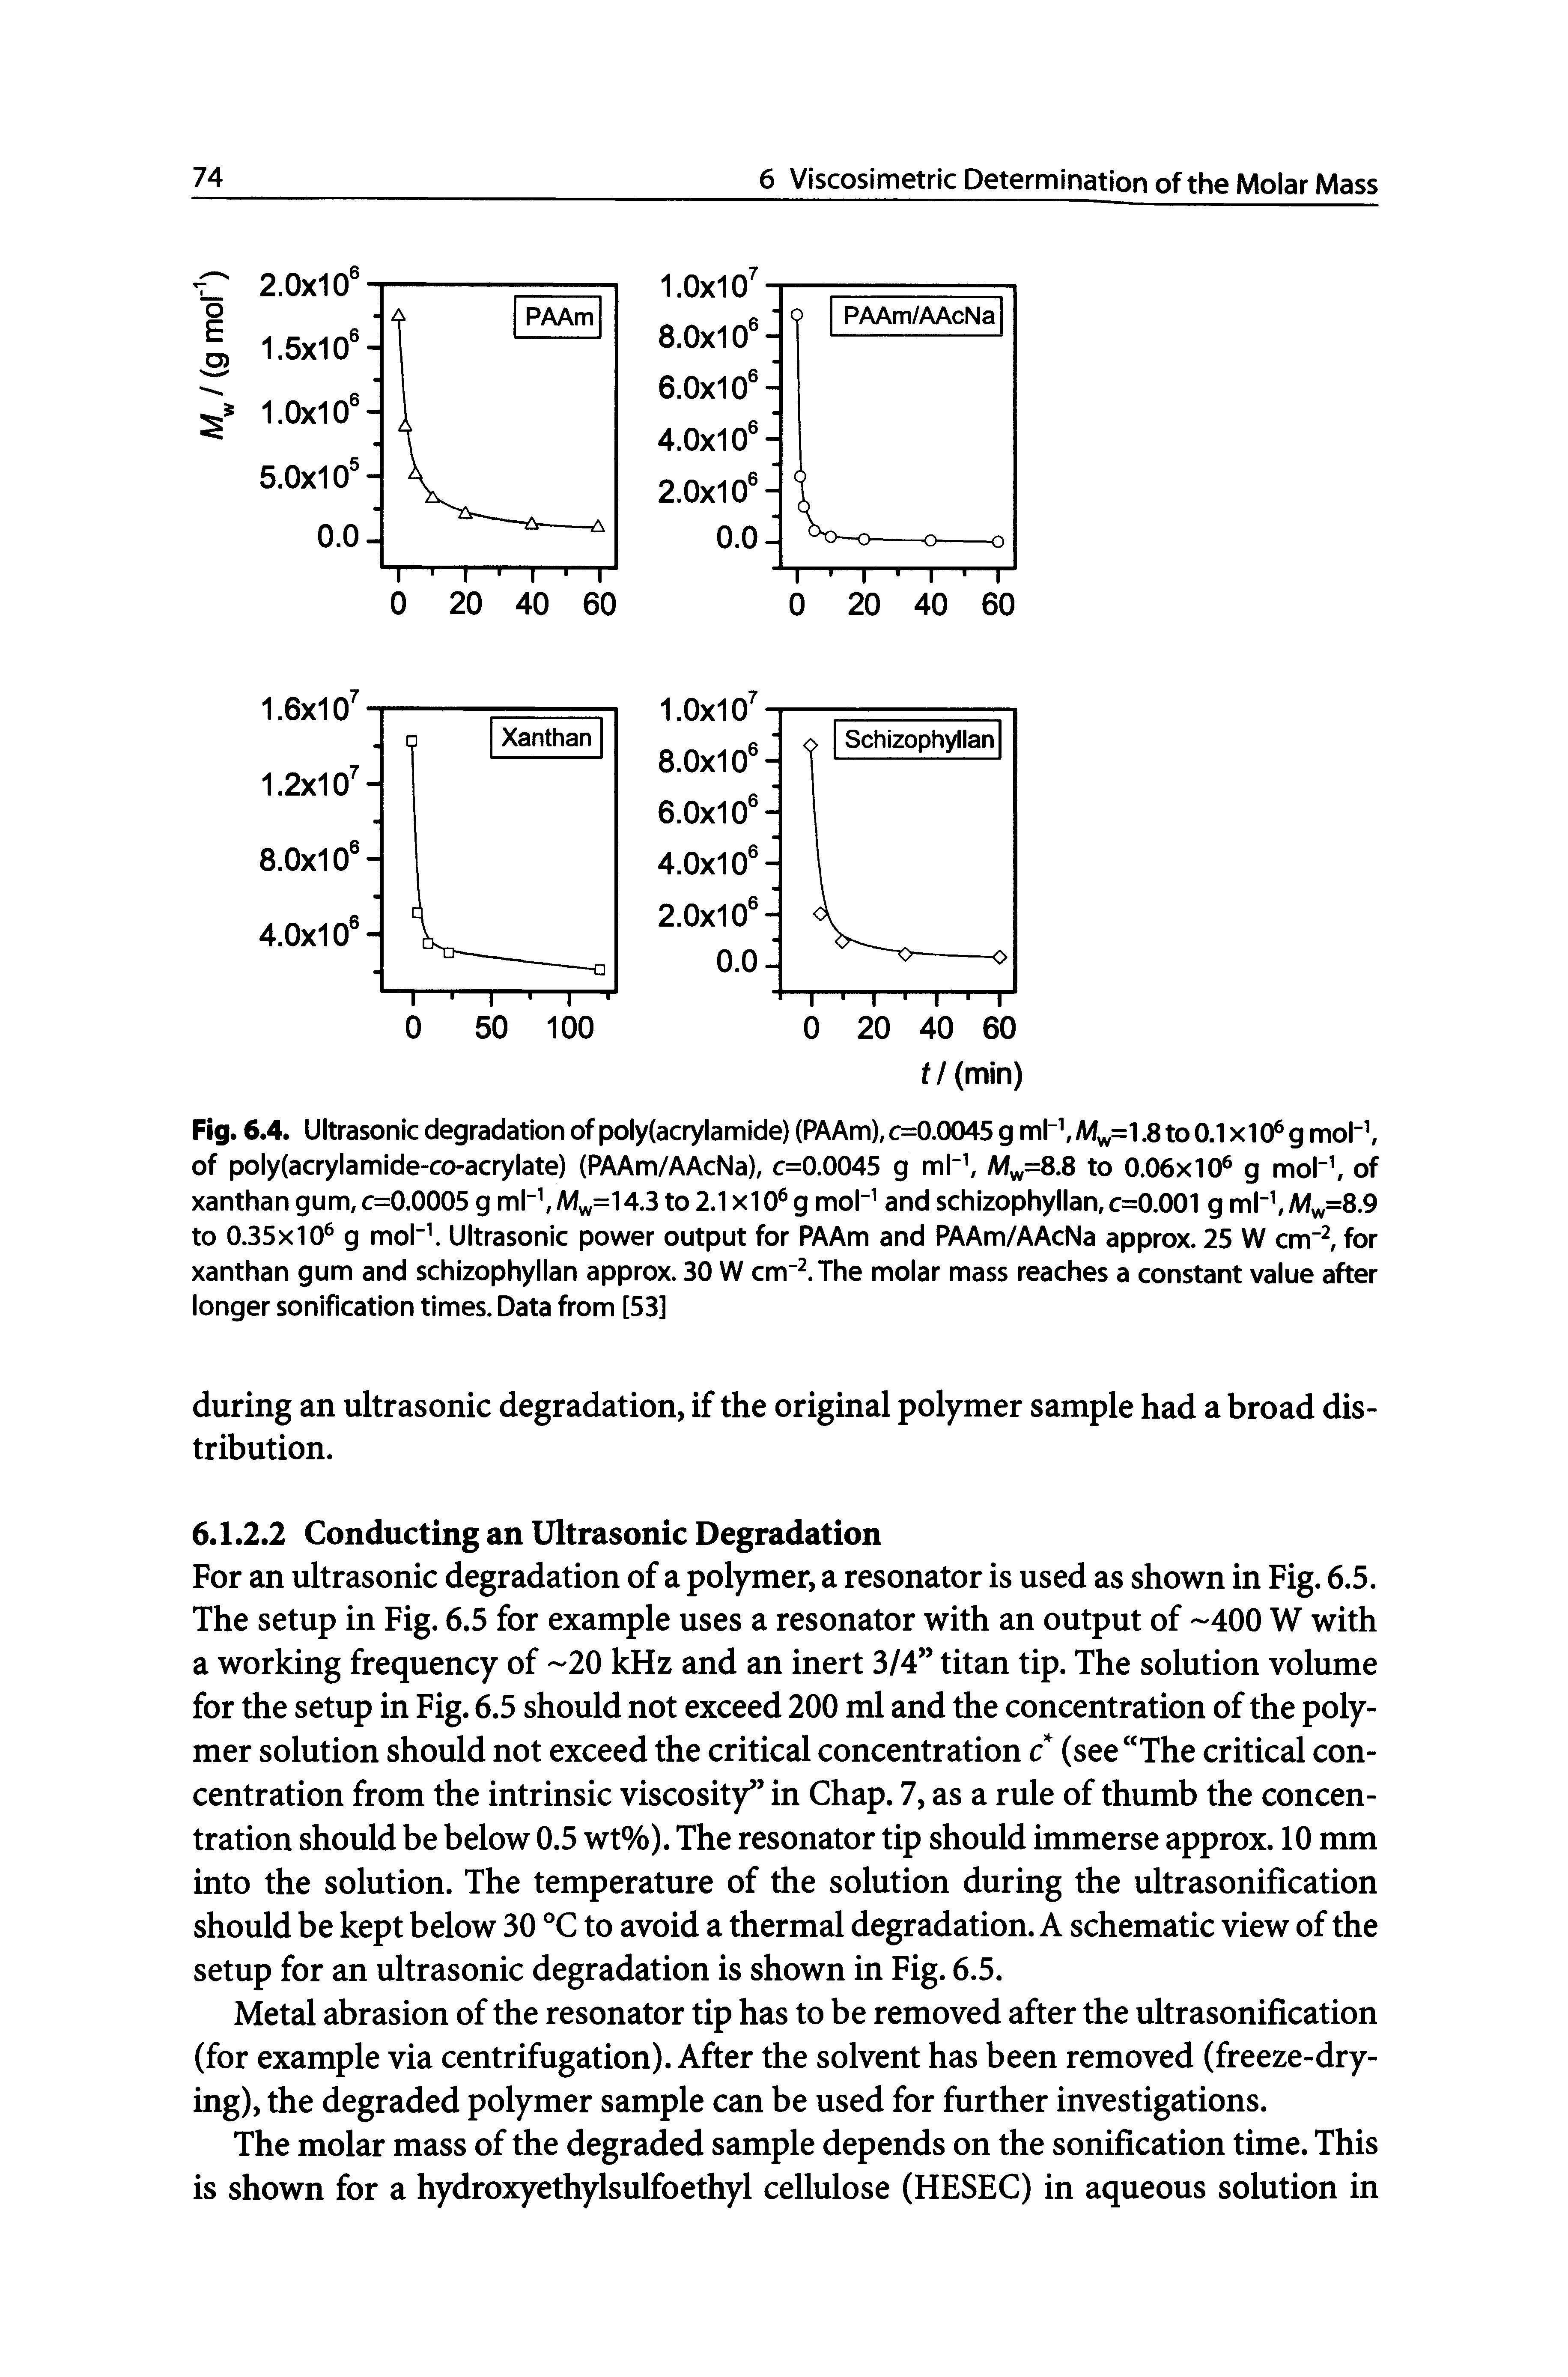 Fig. 6.4. Ultrasonic degradation of poly(acrylamide) (PAAm), c=0.0045 g mM, =1.8 to 0.1 x10 g moM, of poly(acrylamide-co-acrylate) (PAAm/AAcNa), c=0.0045 g m My,=S.S to 0.06x10 g mo - of xanthan gum, c=0.0005 g m - My,= 43 to 2.1 xIO g moM and schizophyllan,c=0.001 g mM,/Ww=8.9 to 0.35x10 g mol Ultrasonic power output for PAAm and PAAm/AAcNa approx. 25 W cm", for xanthan gum and schizophyllan approx. 30 W cm". The molar mass reaches a constant value after longer sonification times. Data from [53]...